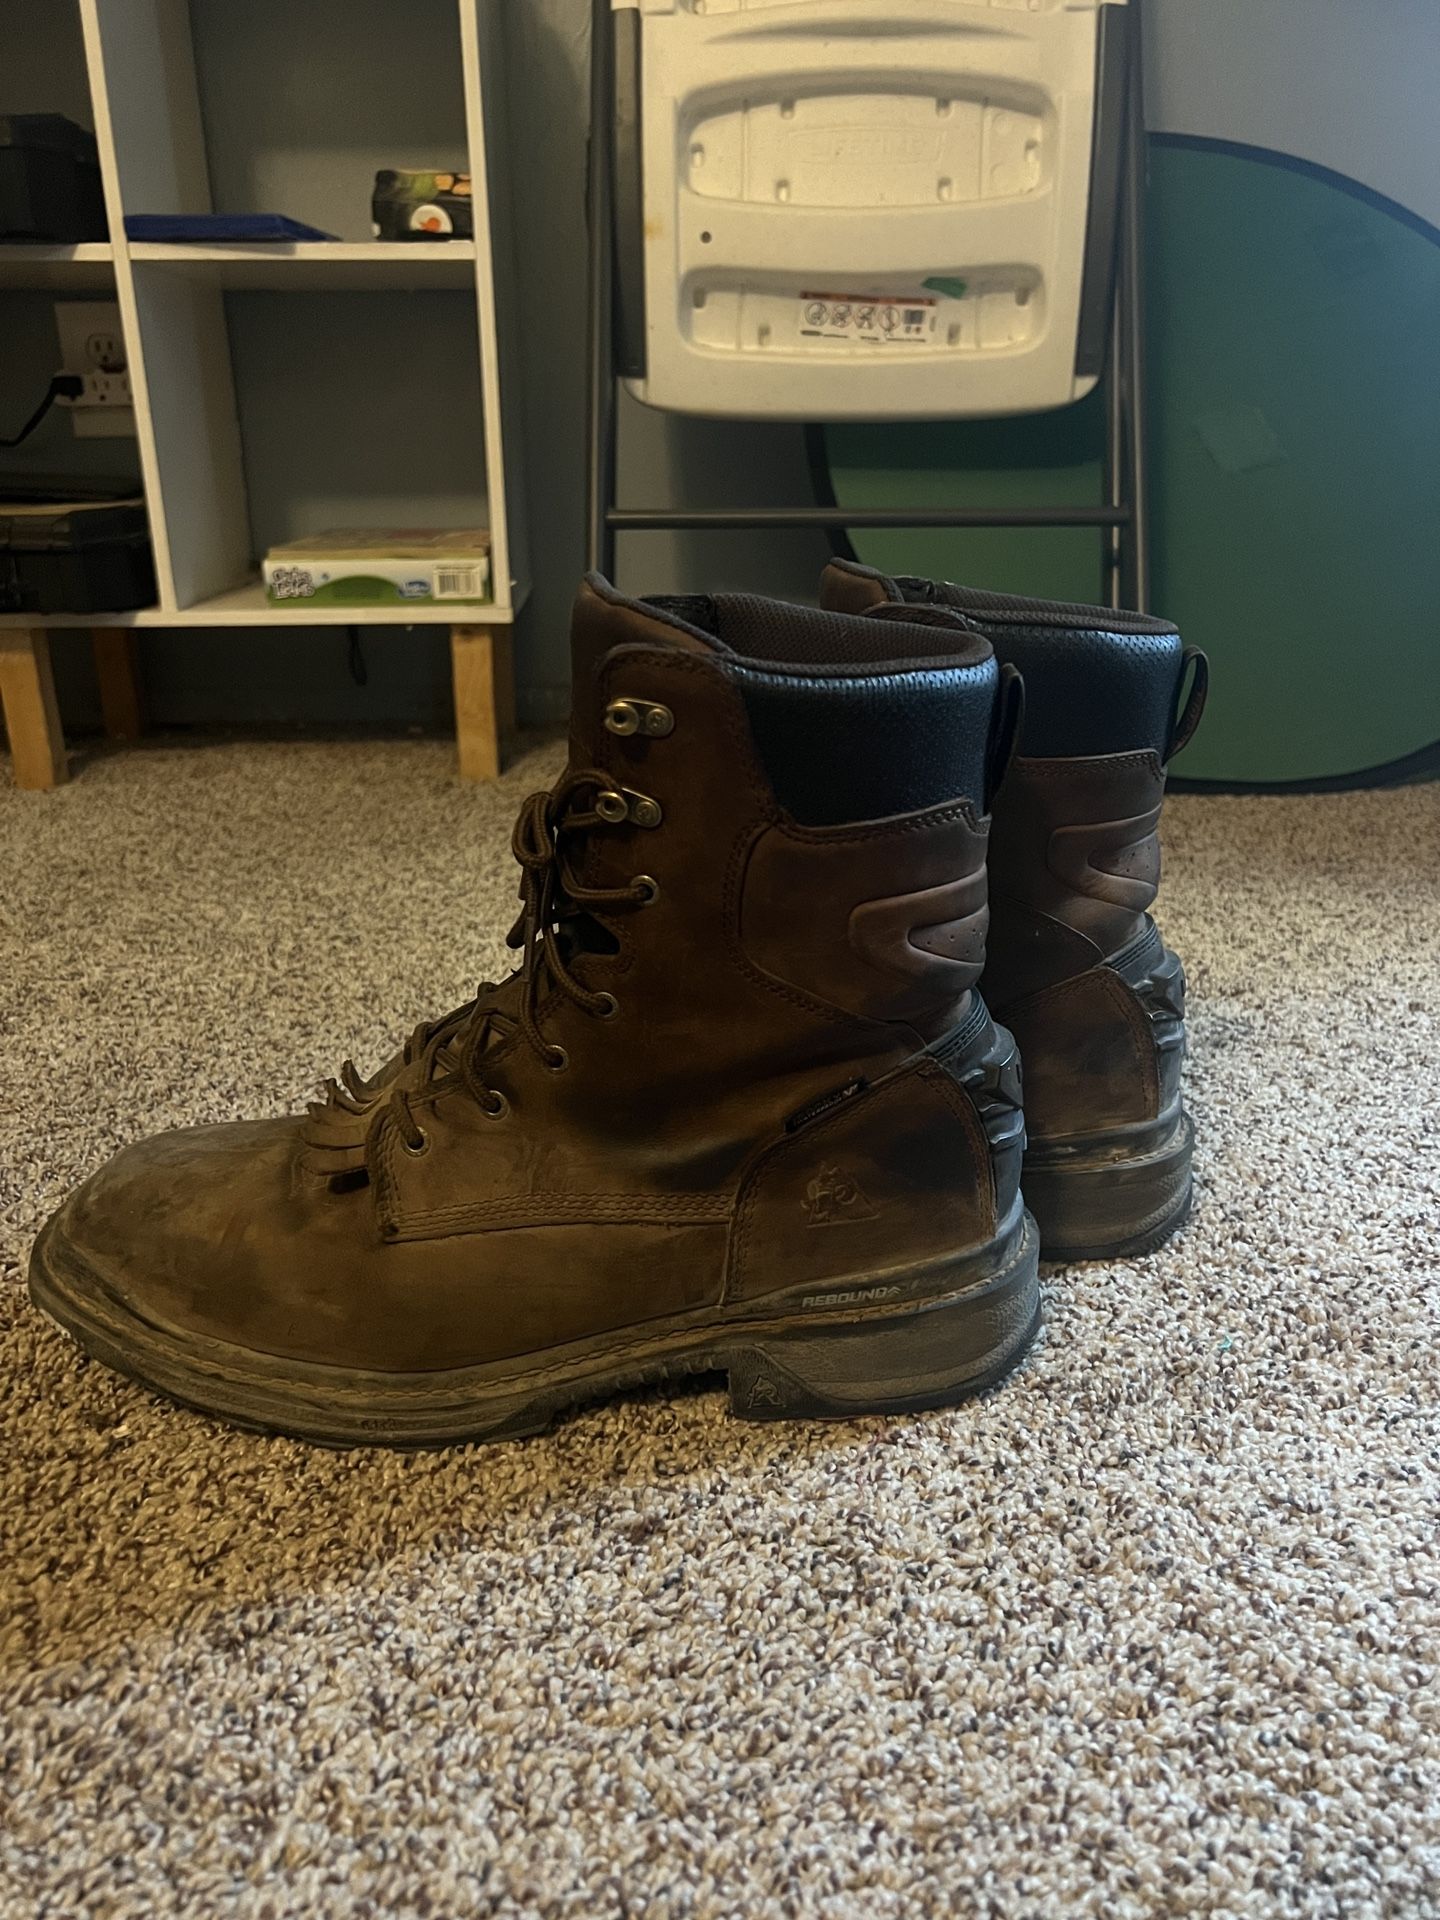 Work Boots Size 13